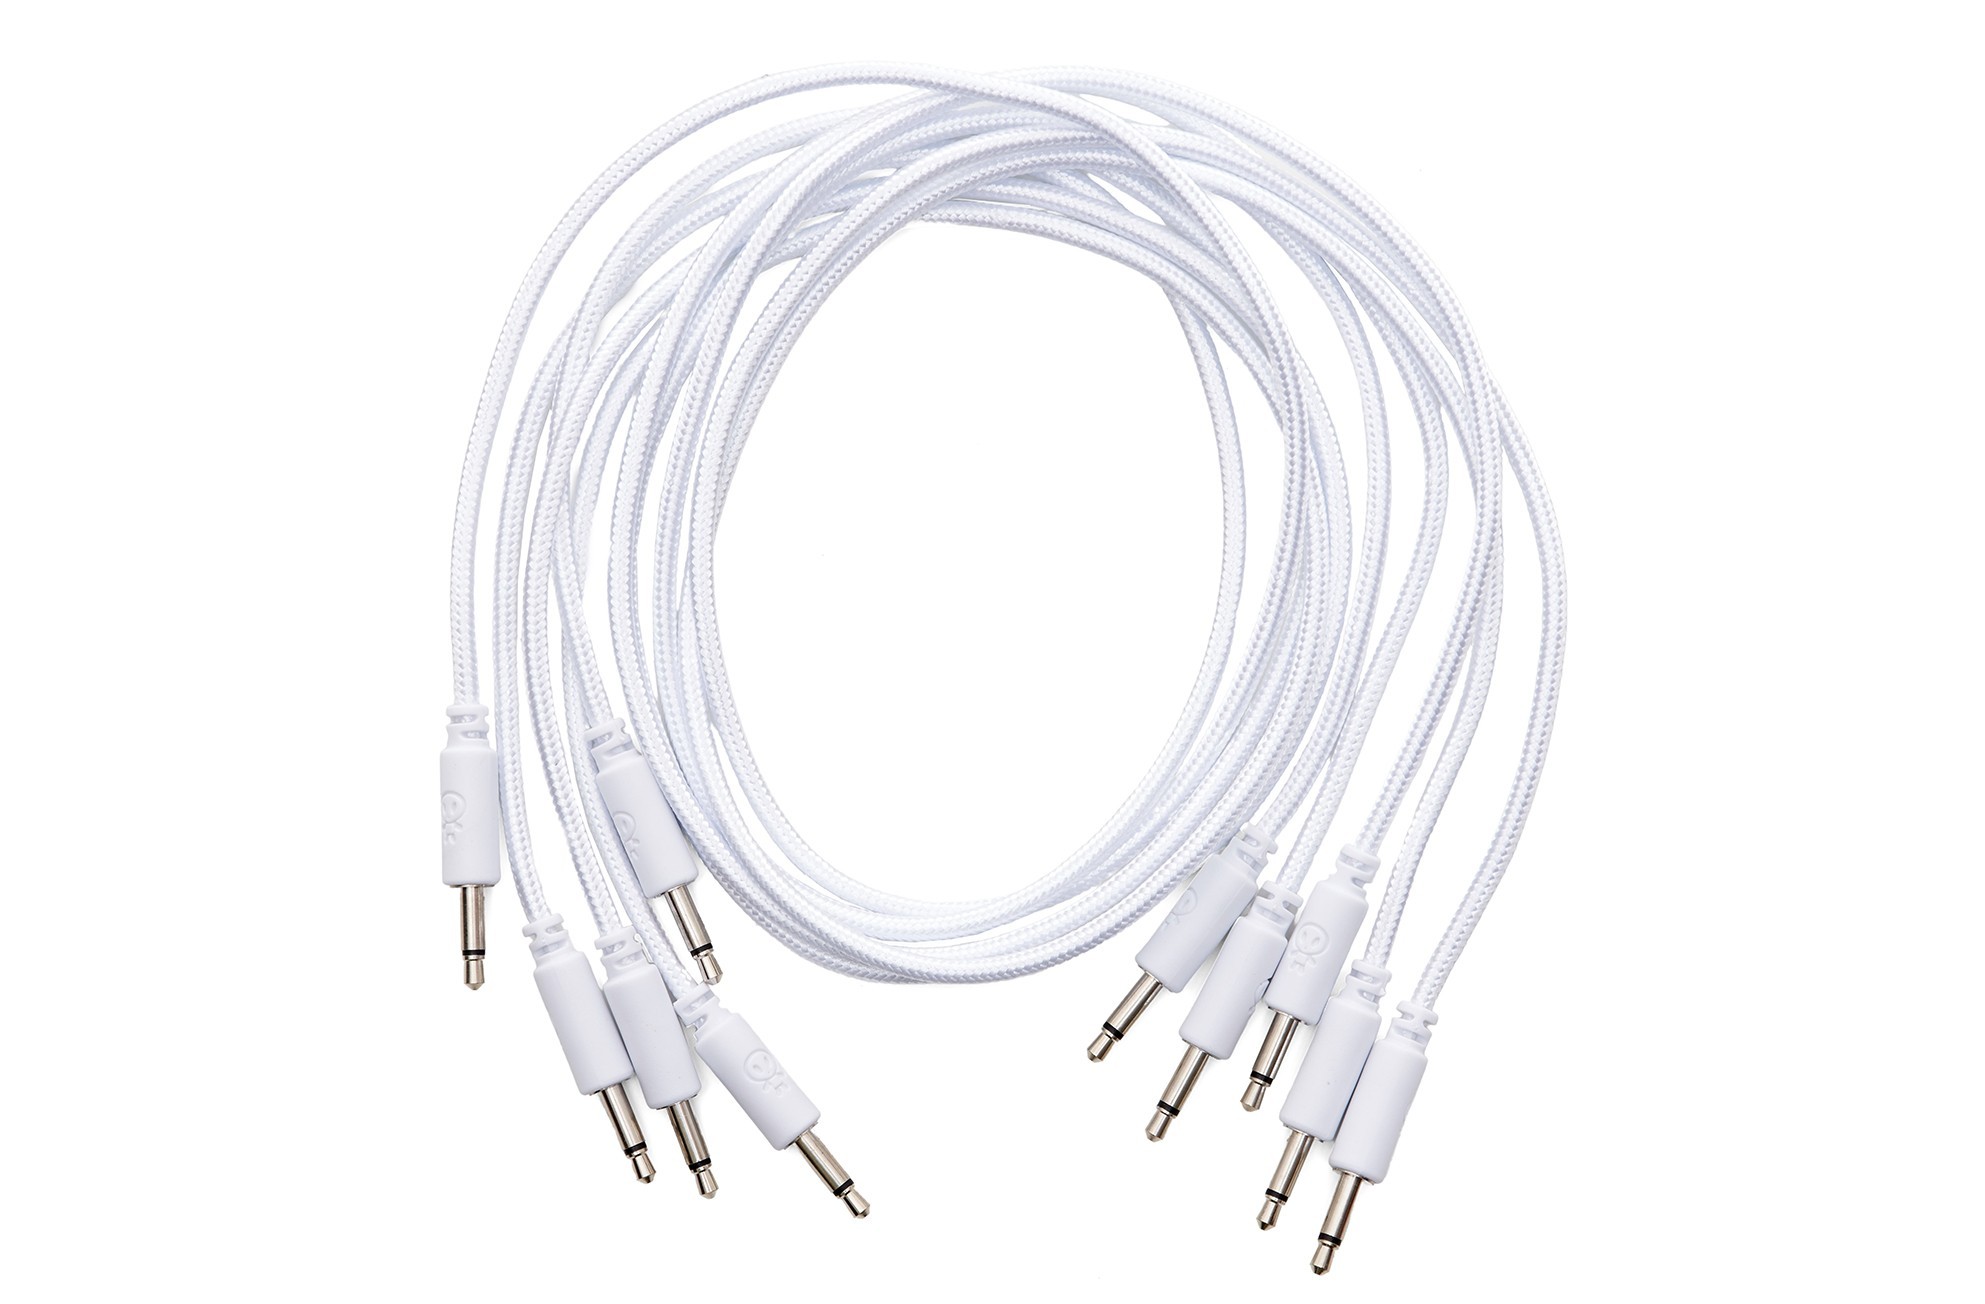 Erica Synths Braided Eurorack Patch Cables 60cm (5 pcs) - White